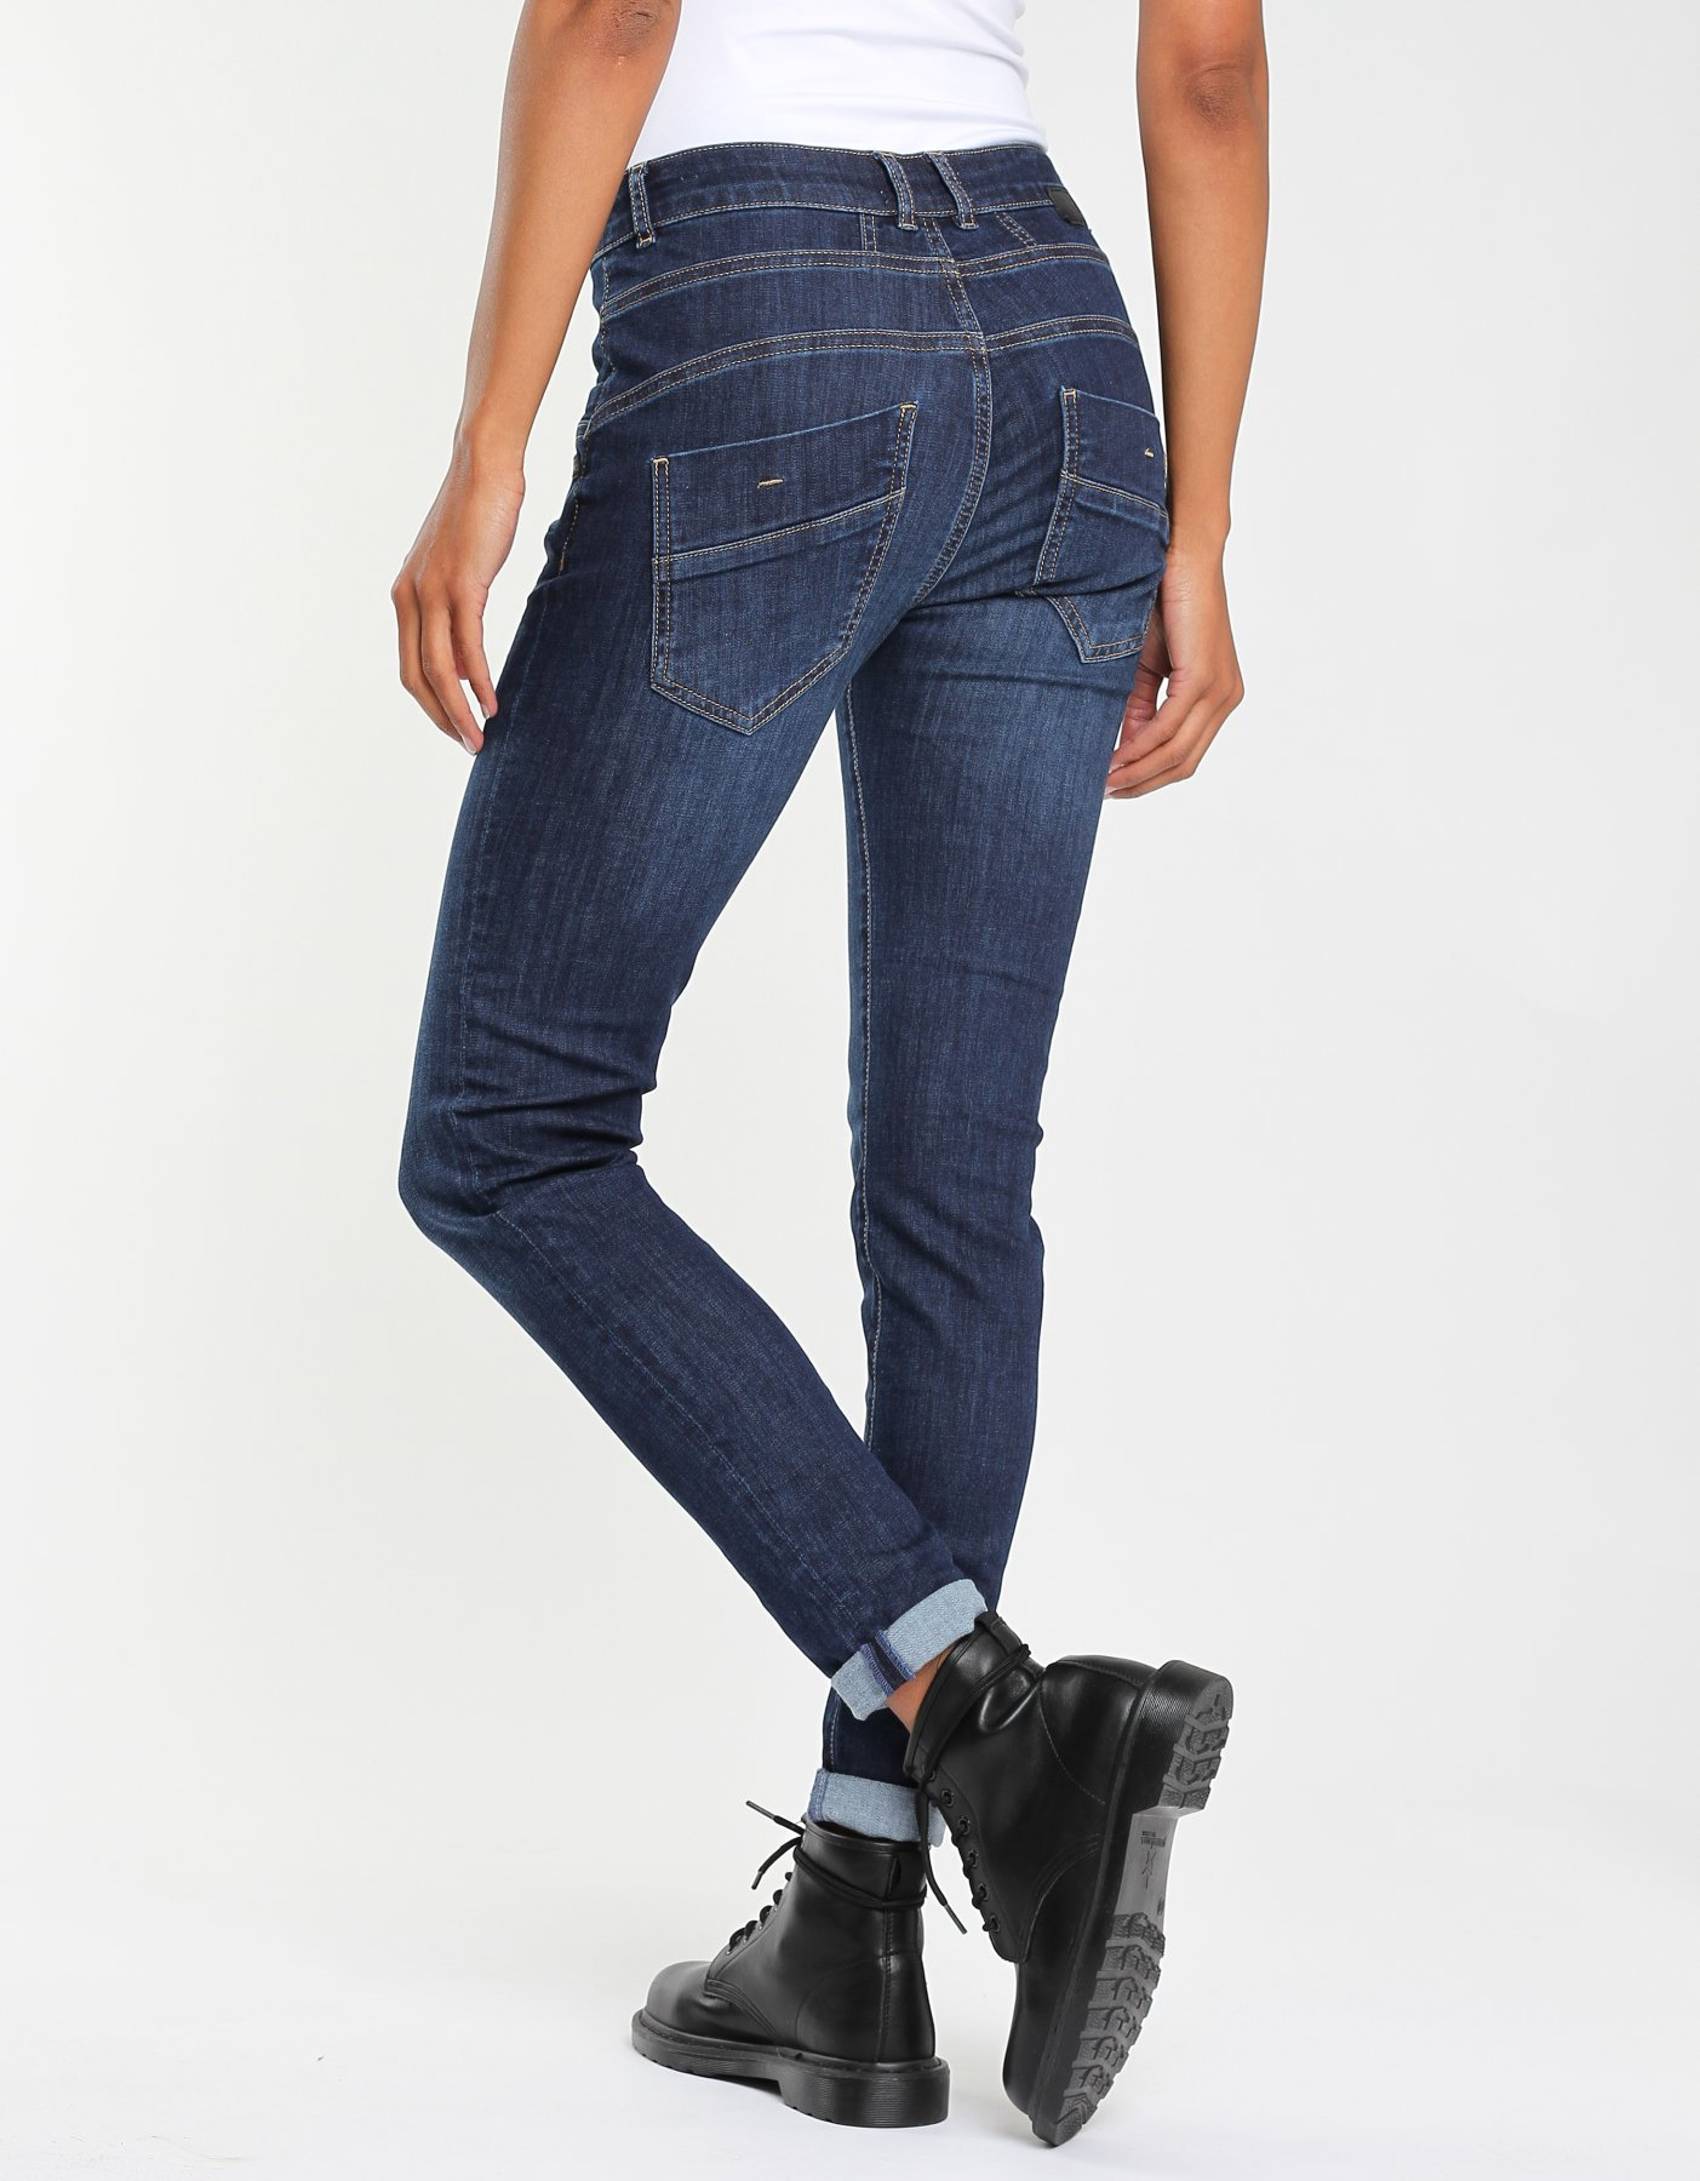 GANG | fit relaxed - 94Gerda Jeans